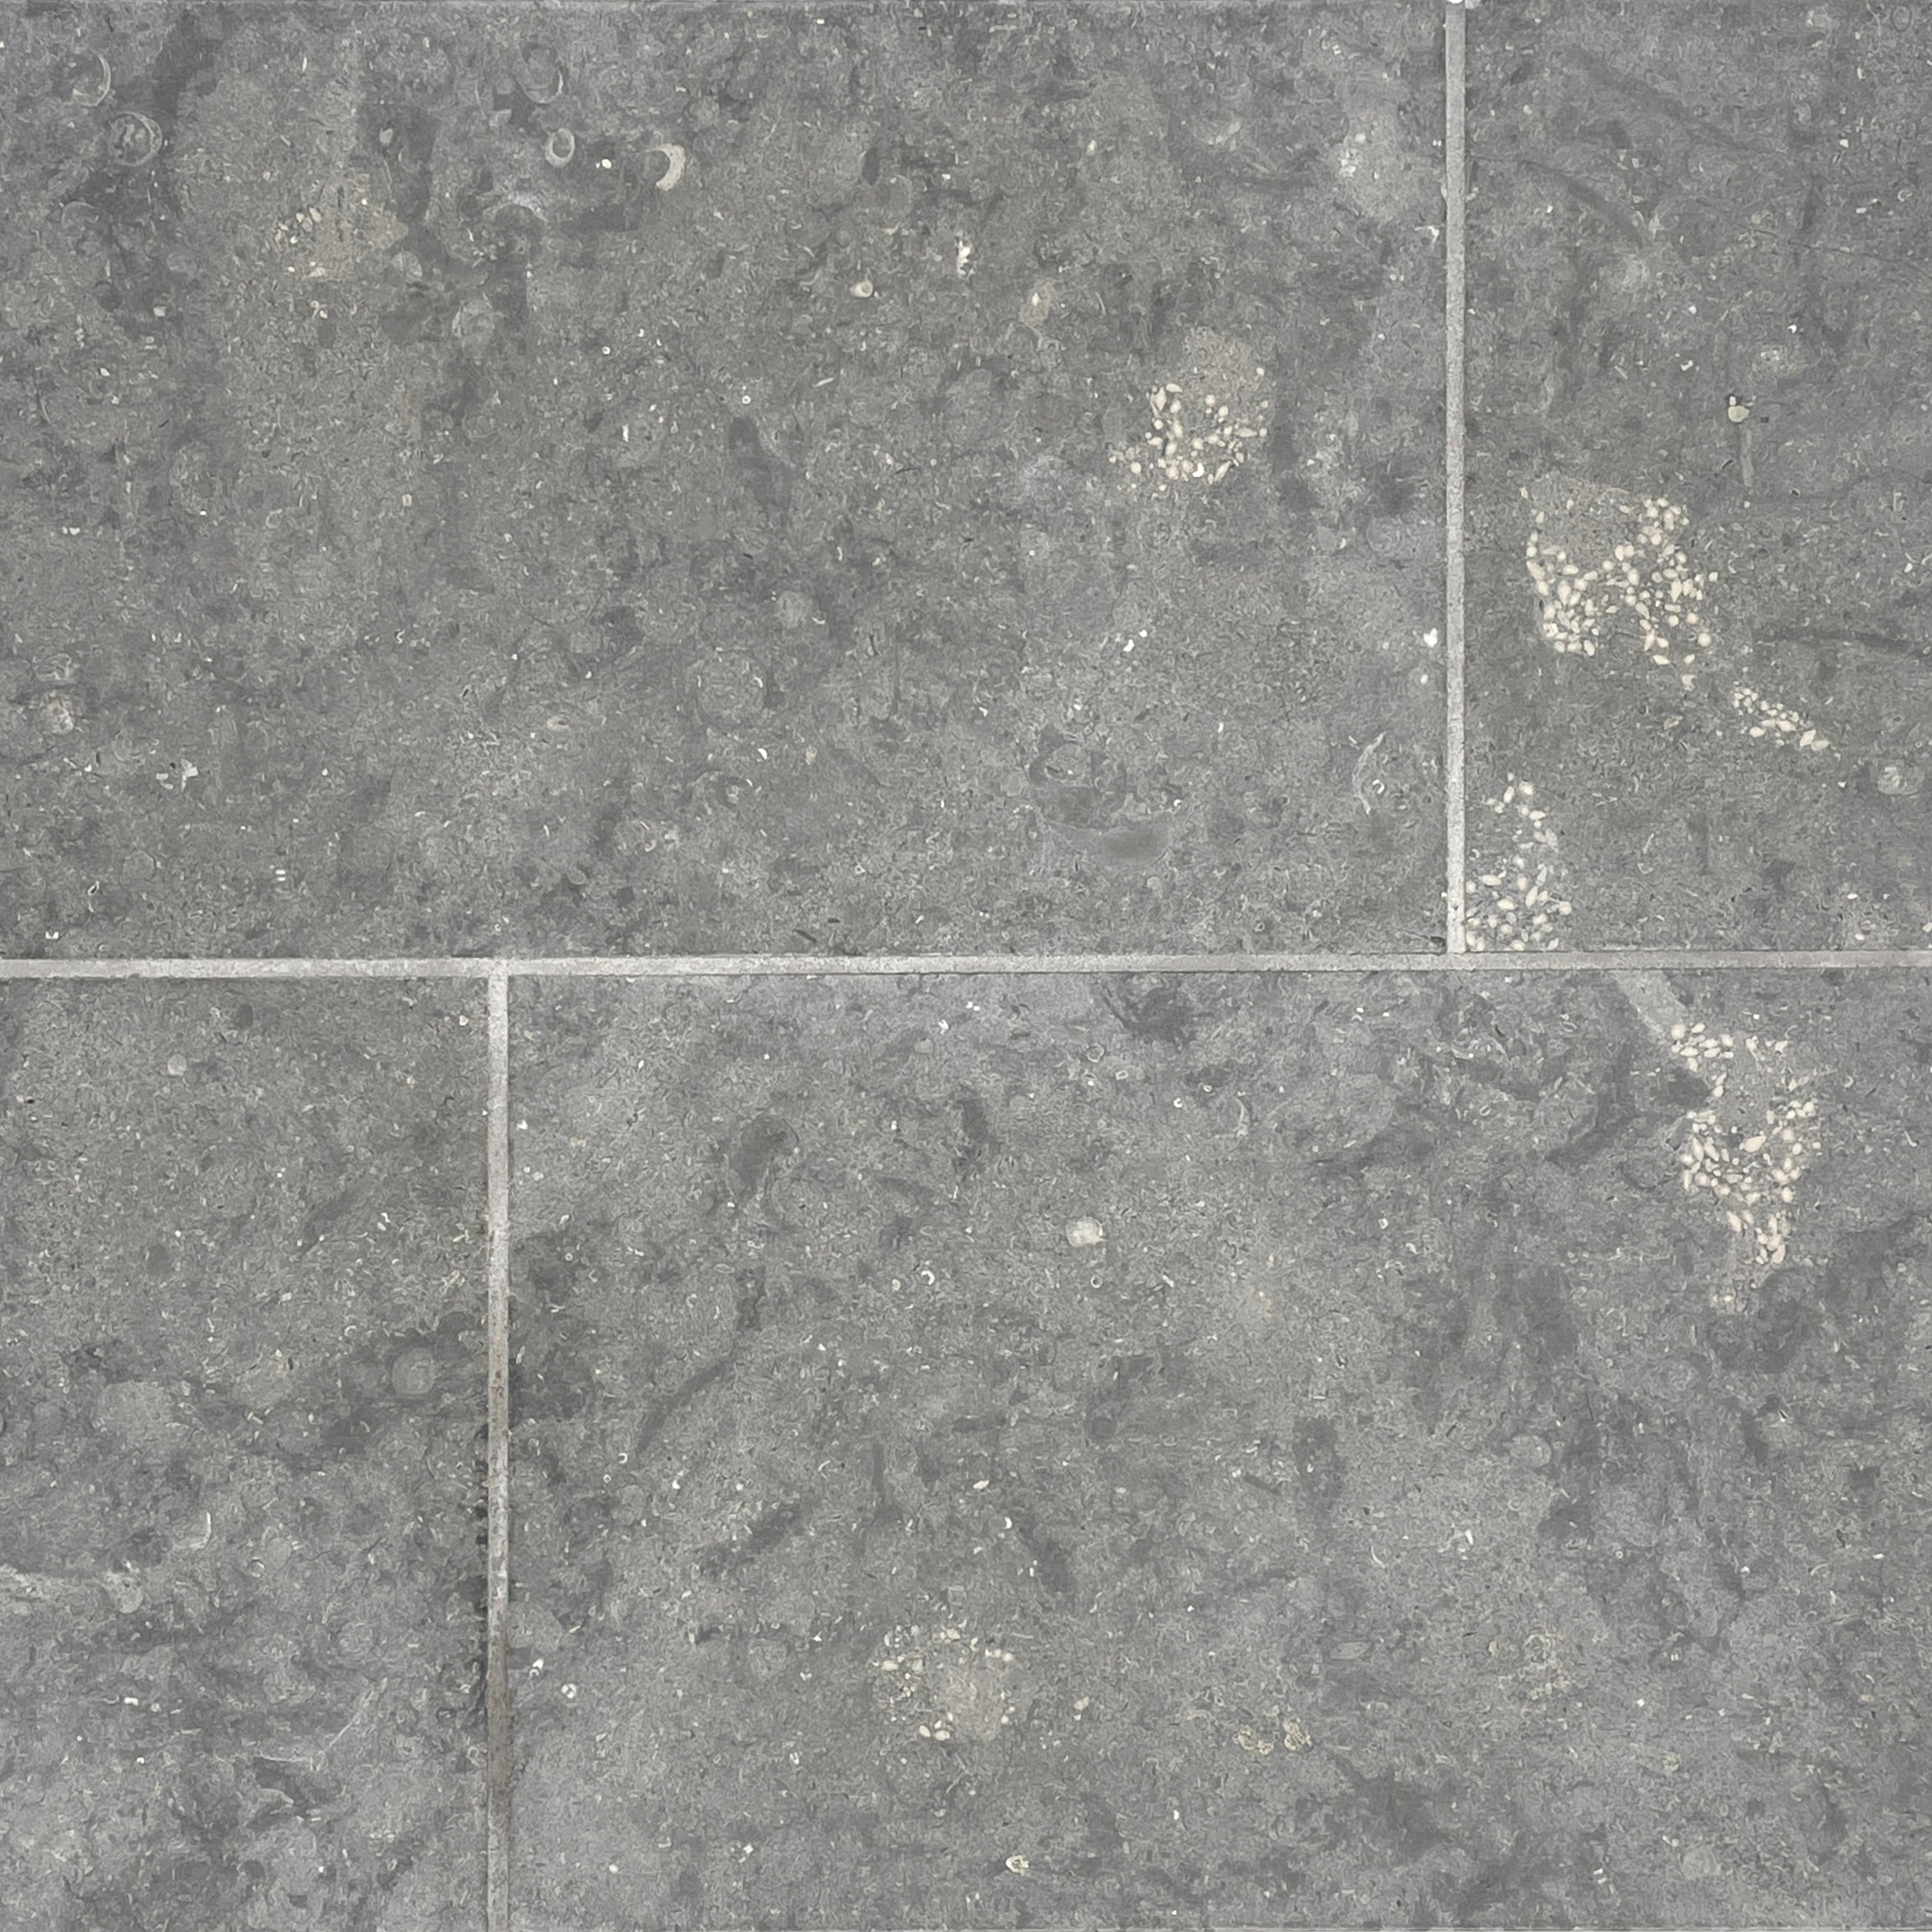 tuxedo grey limestone gray stone tile  sold by surface group